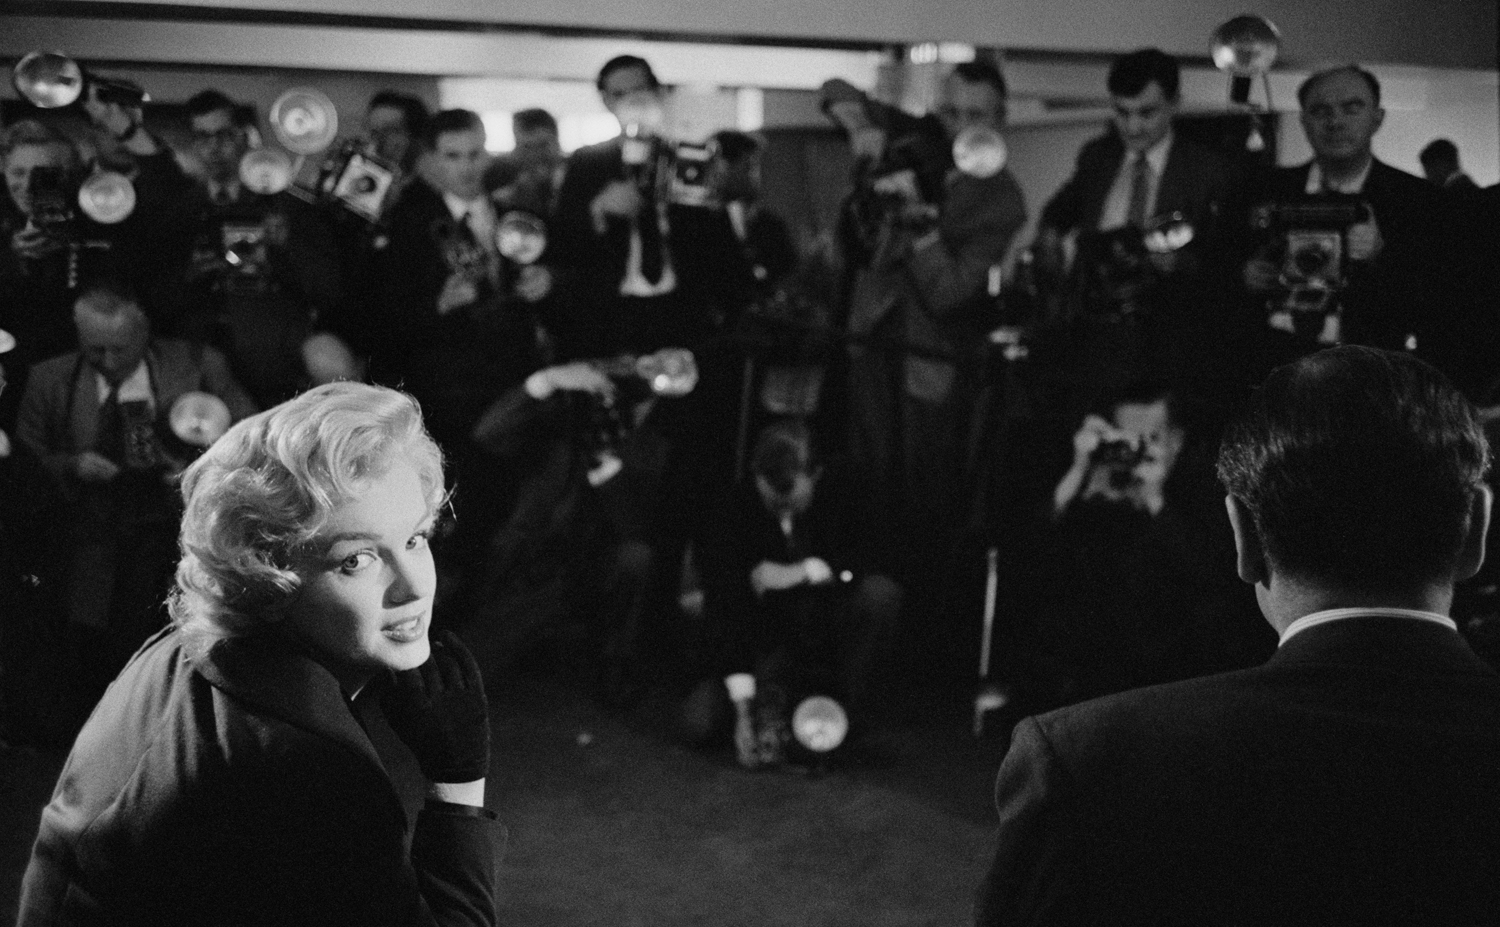 The star at a press conference in London's Savoy Hotel in 1956.